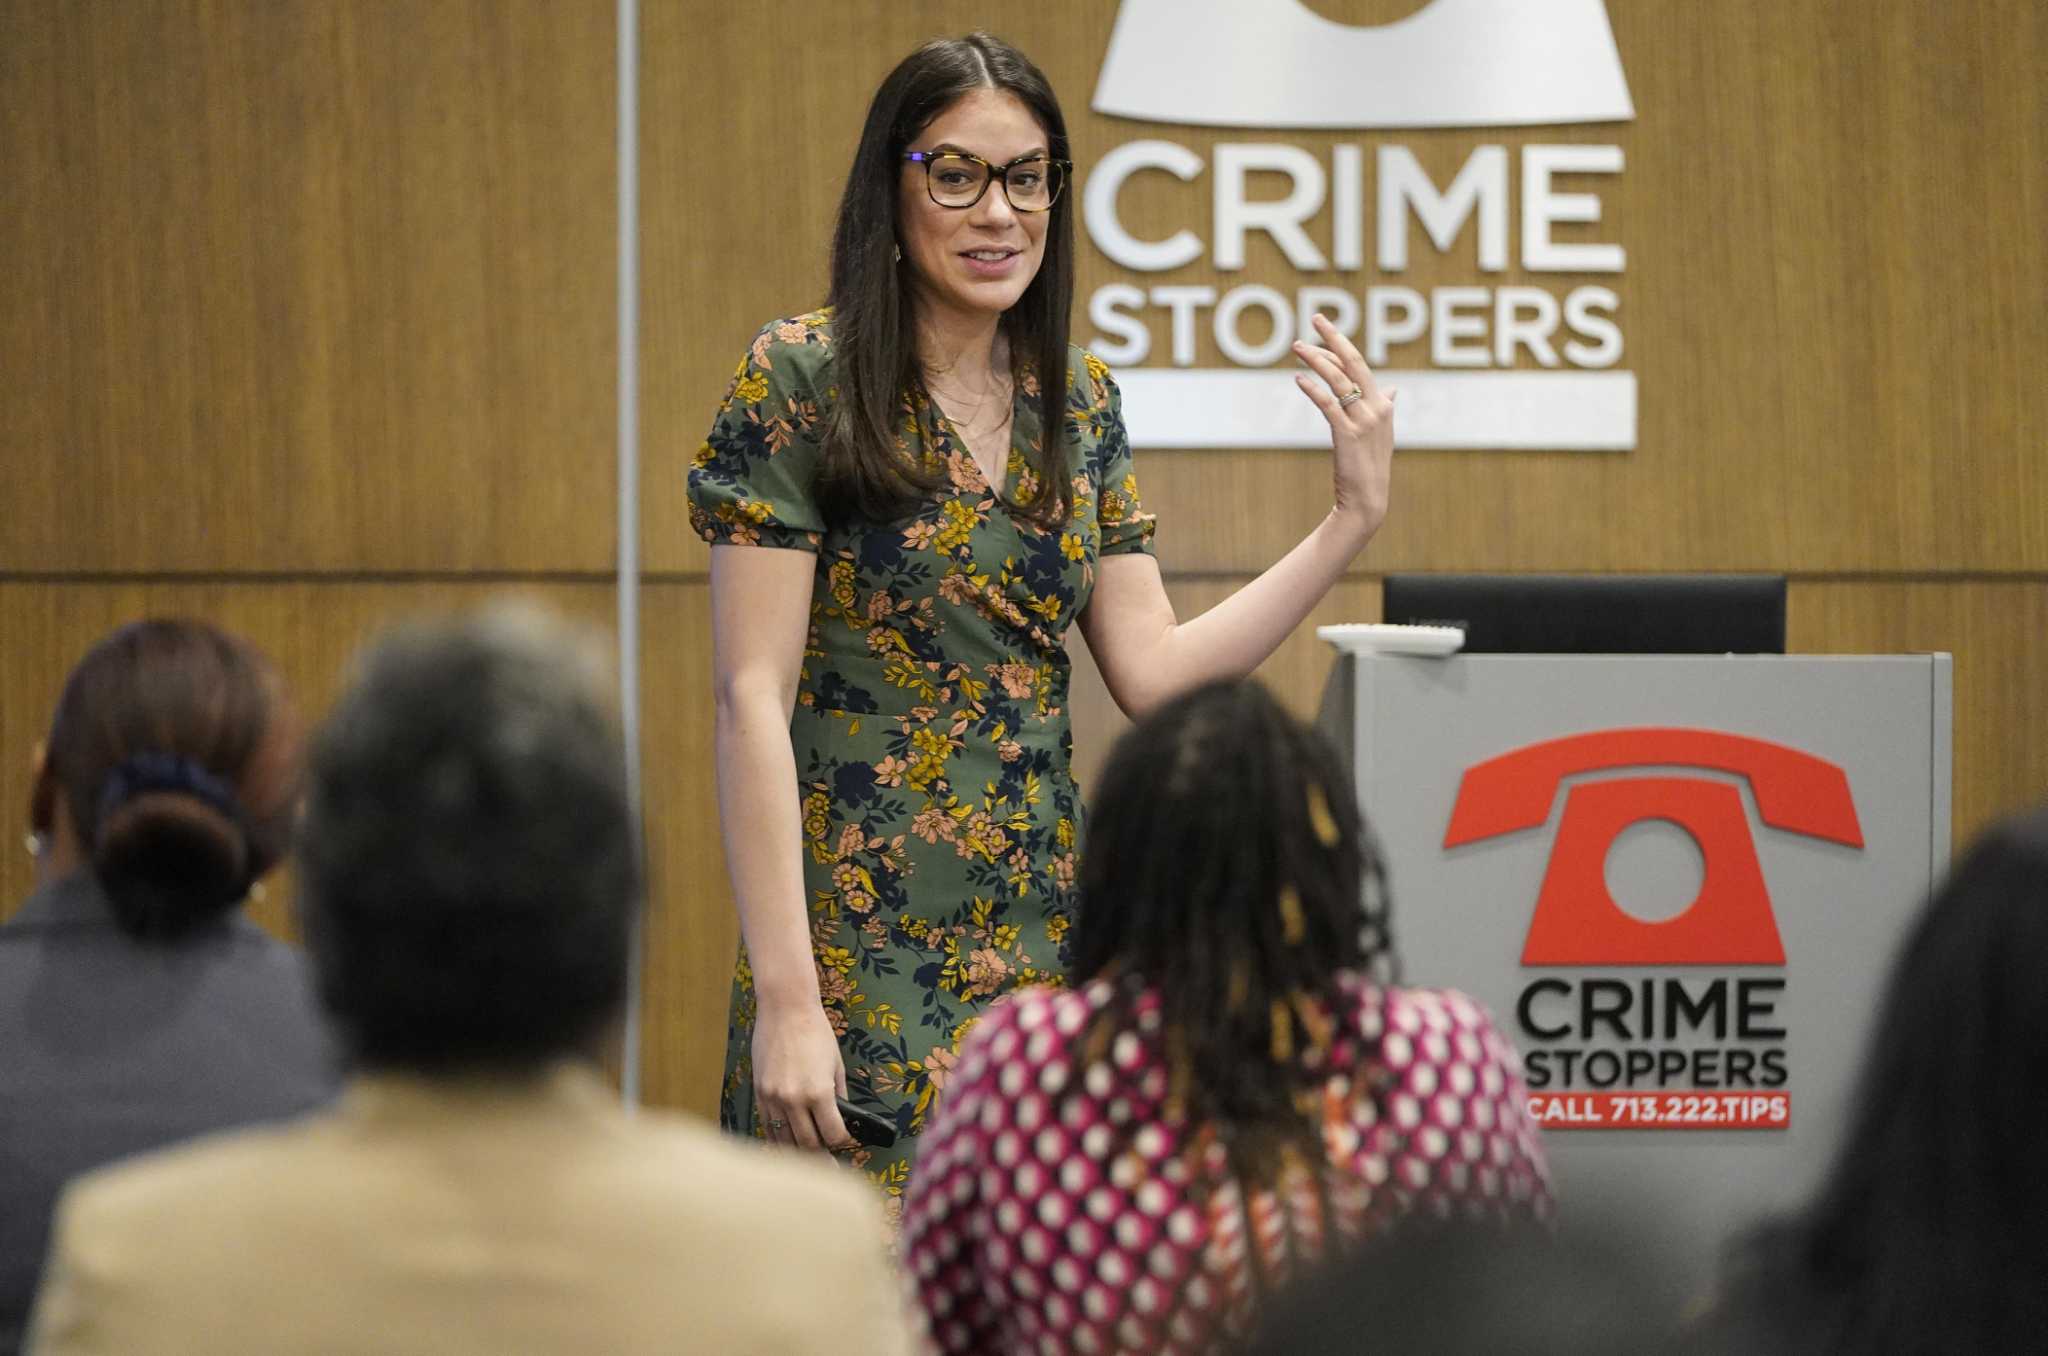 Ladies Who Lunch' Turn Their Focus to Bullying at Crime Stoppers